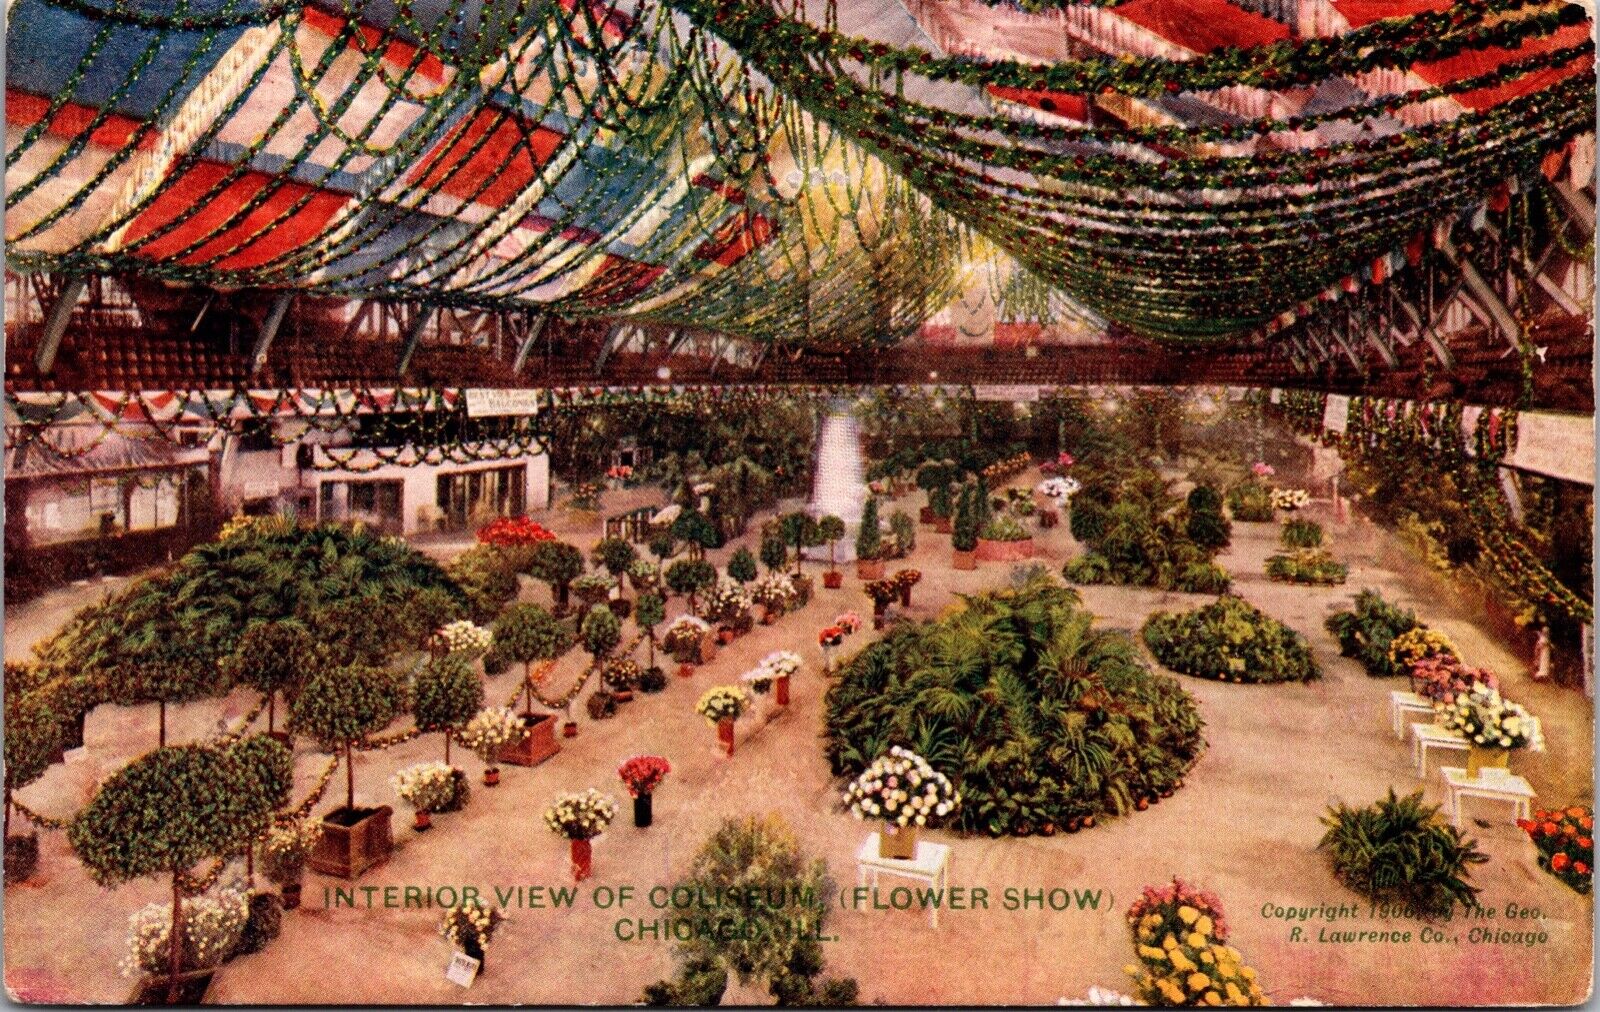 Postcard Interior View of Coliseum Flower Show in Chicago, Illinois~3807